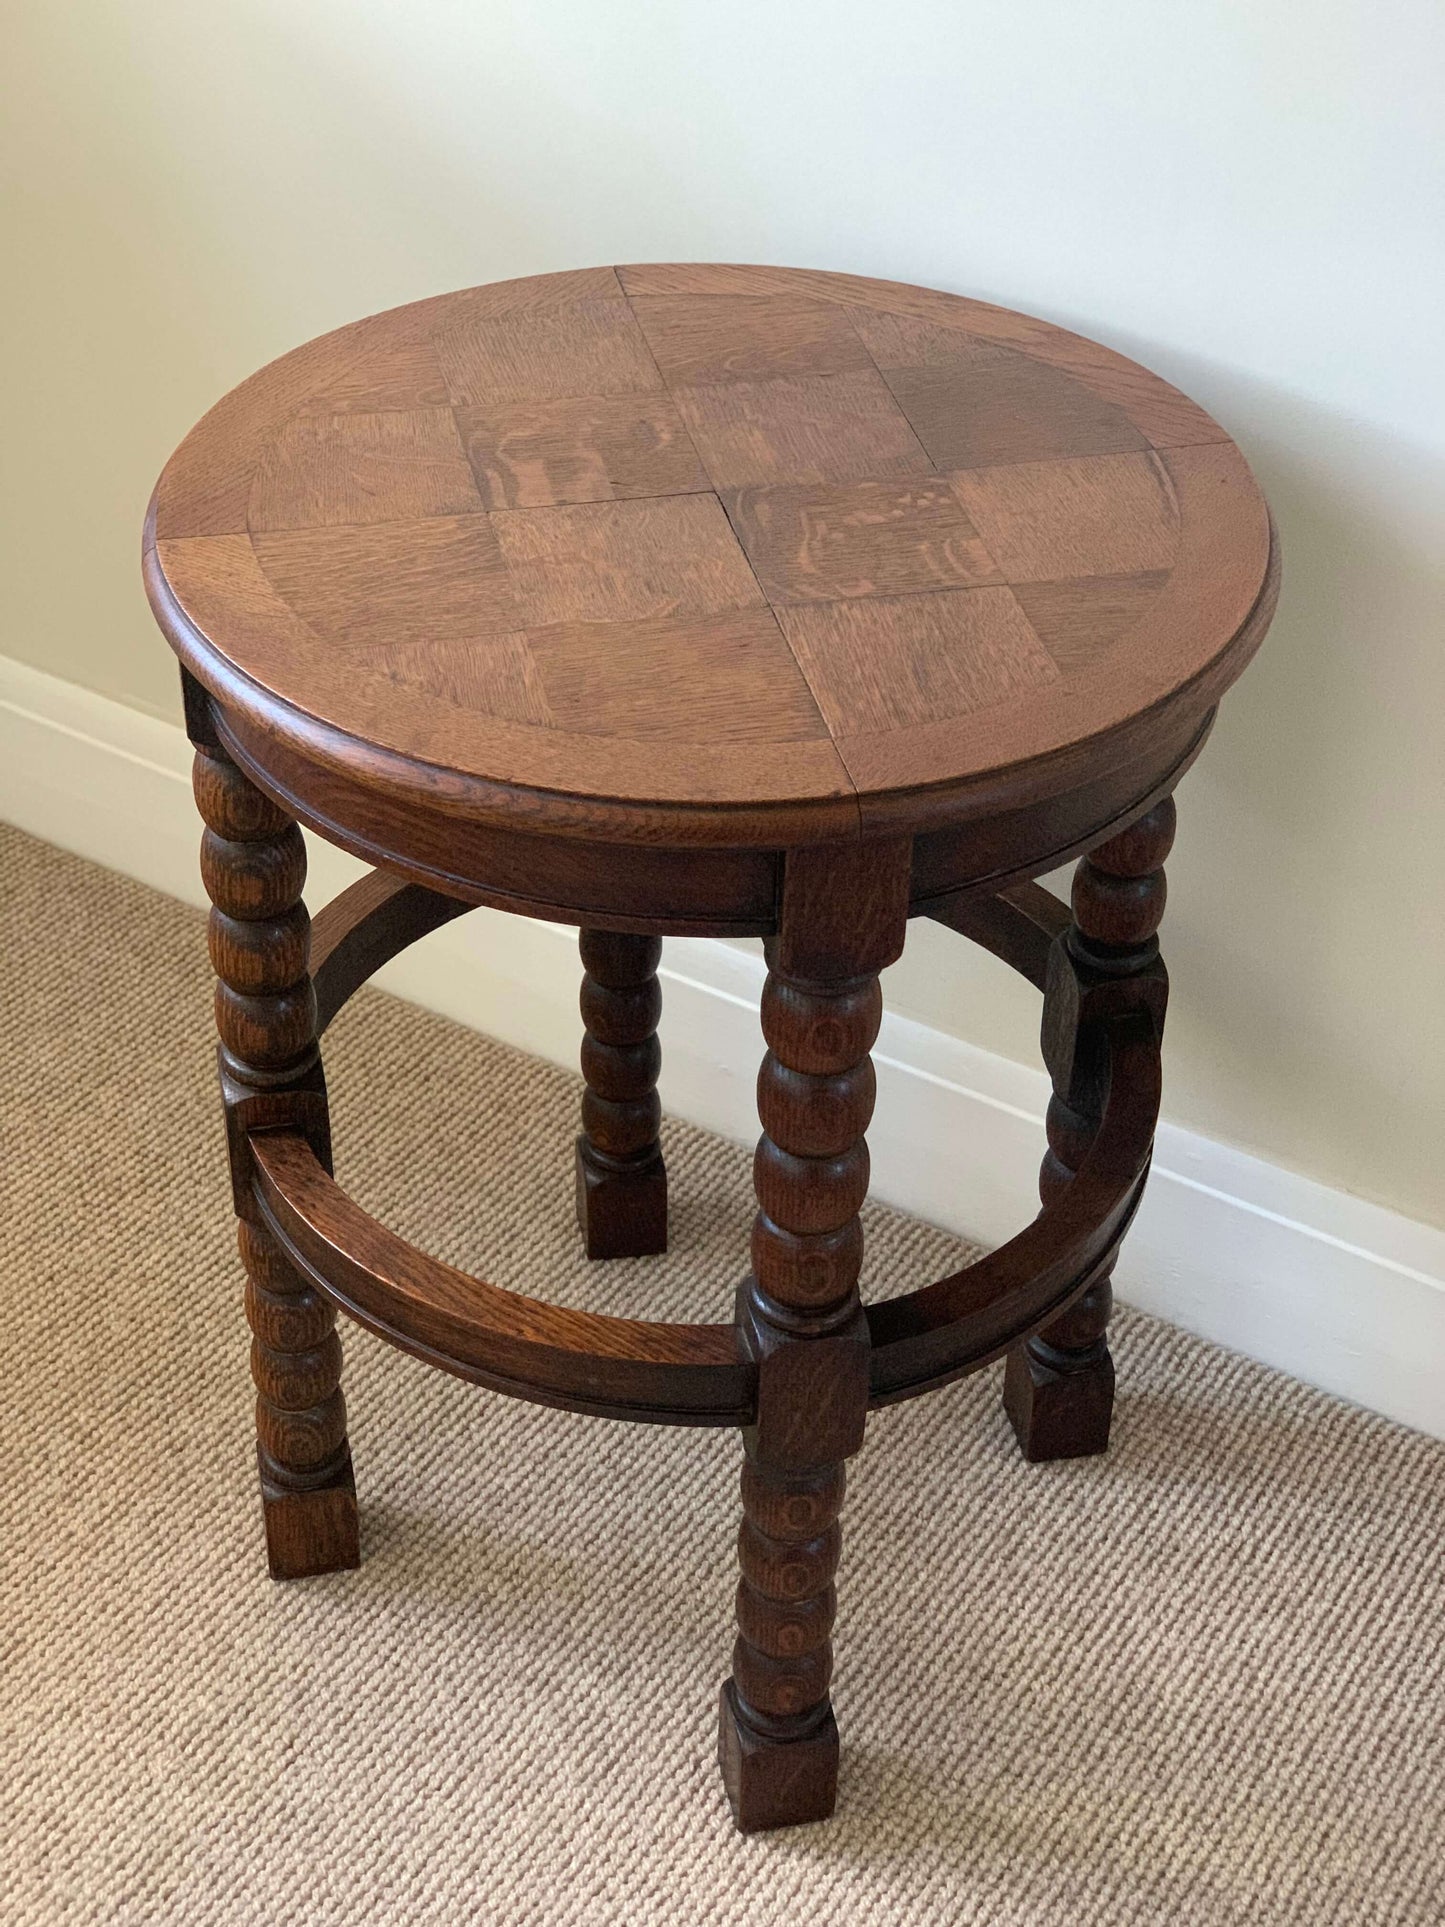 ON HOLD Antique circular bobbin table with parquet top